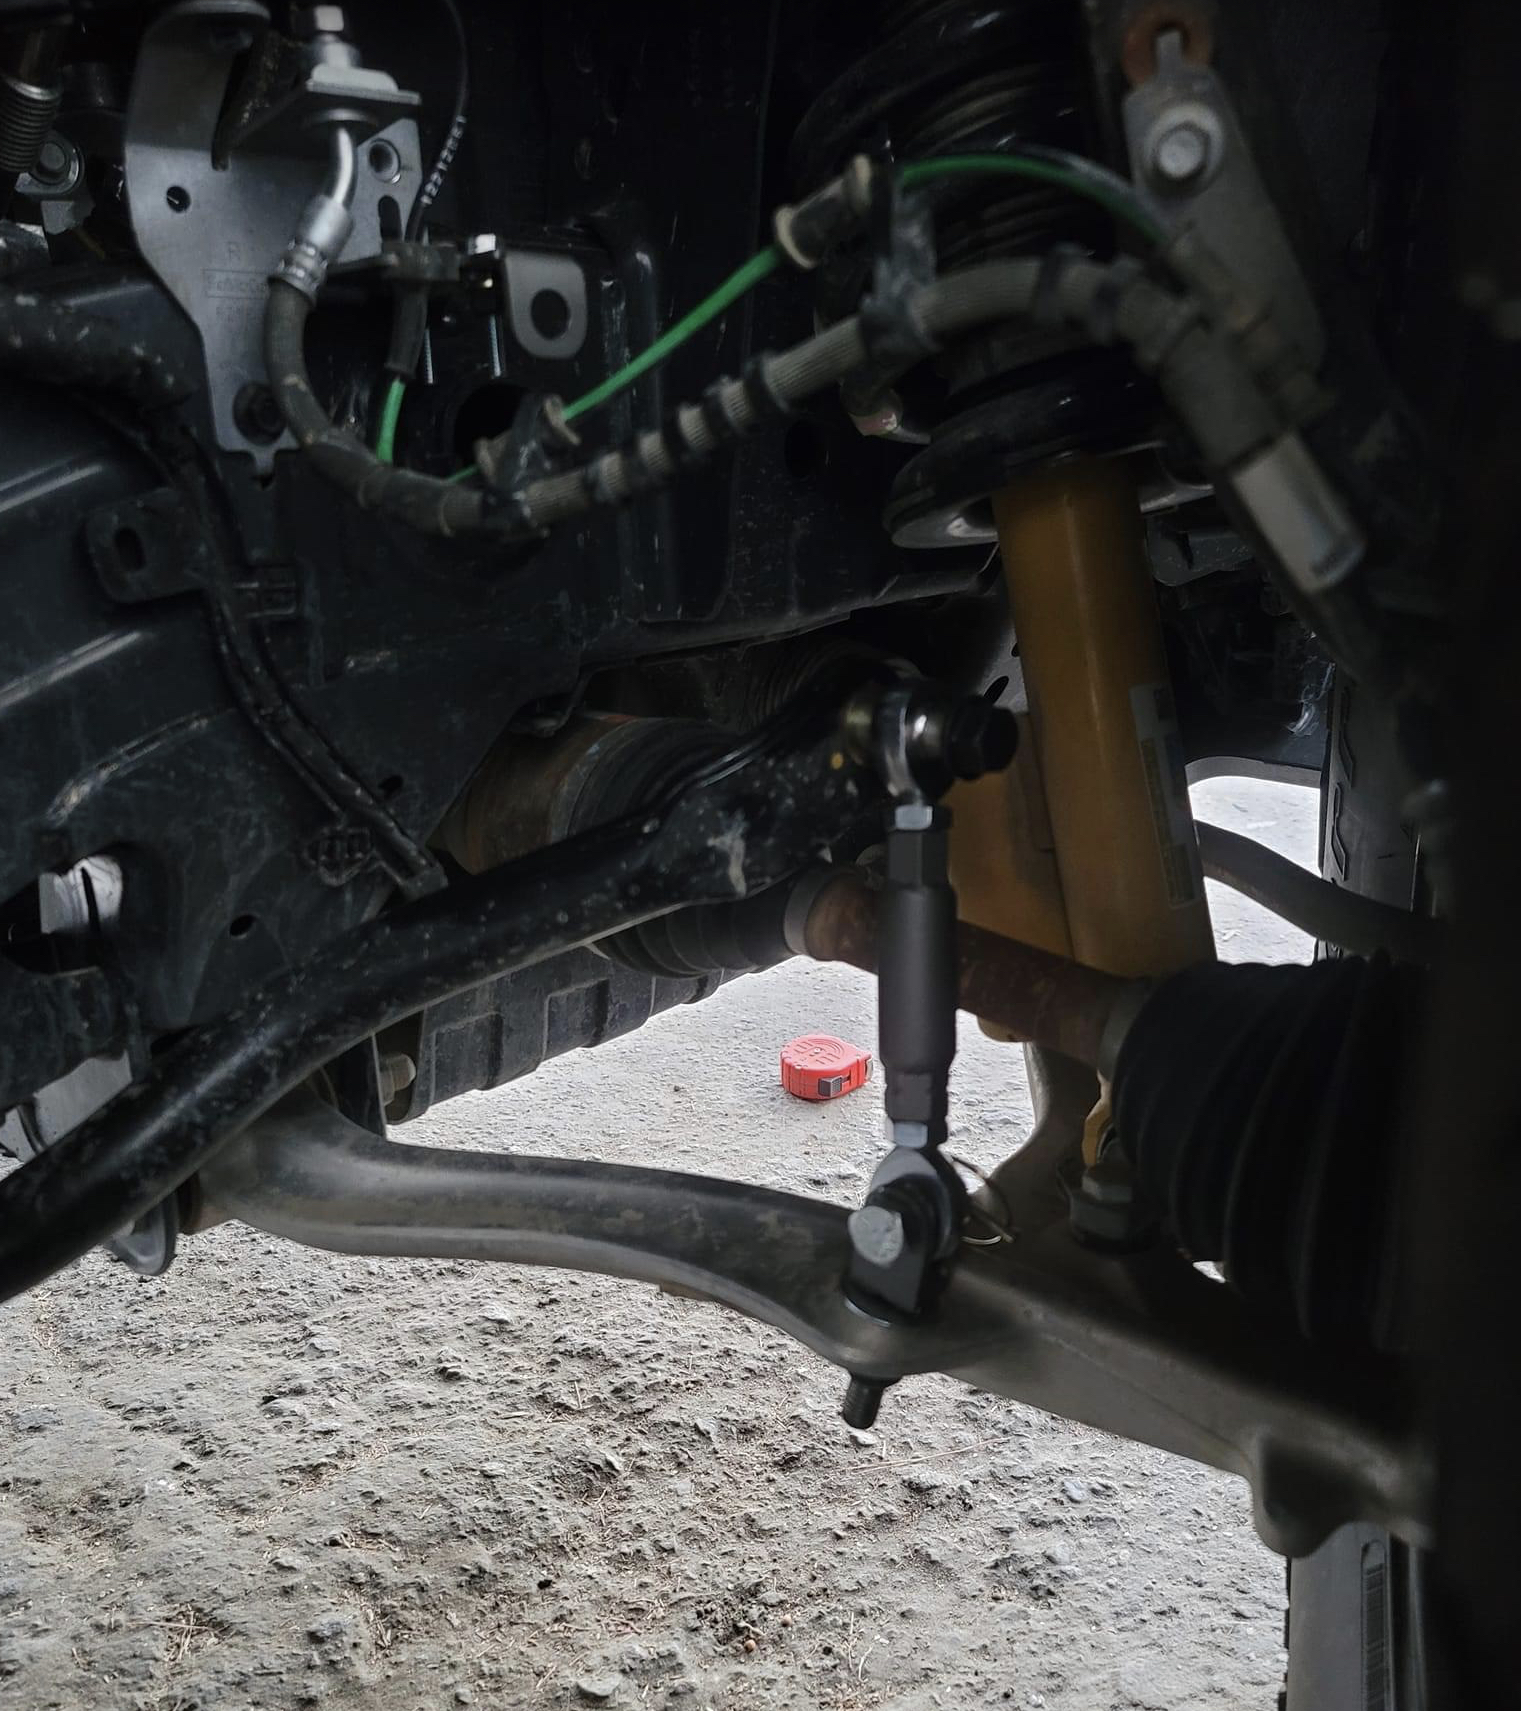 Ford Bronco First Look: Aftermarket Bronco Sway Bar Quick Disconnects A254F221-0979-4739-9C93-177DD3E1029D